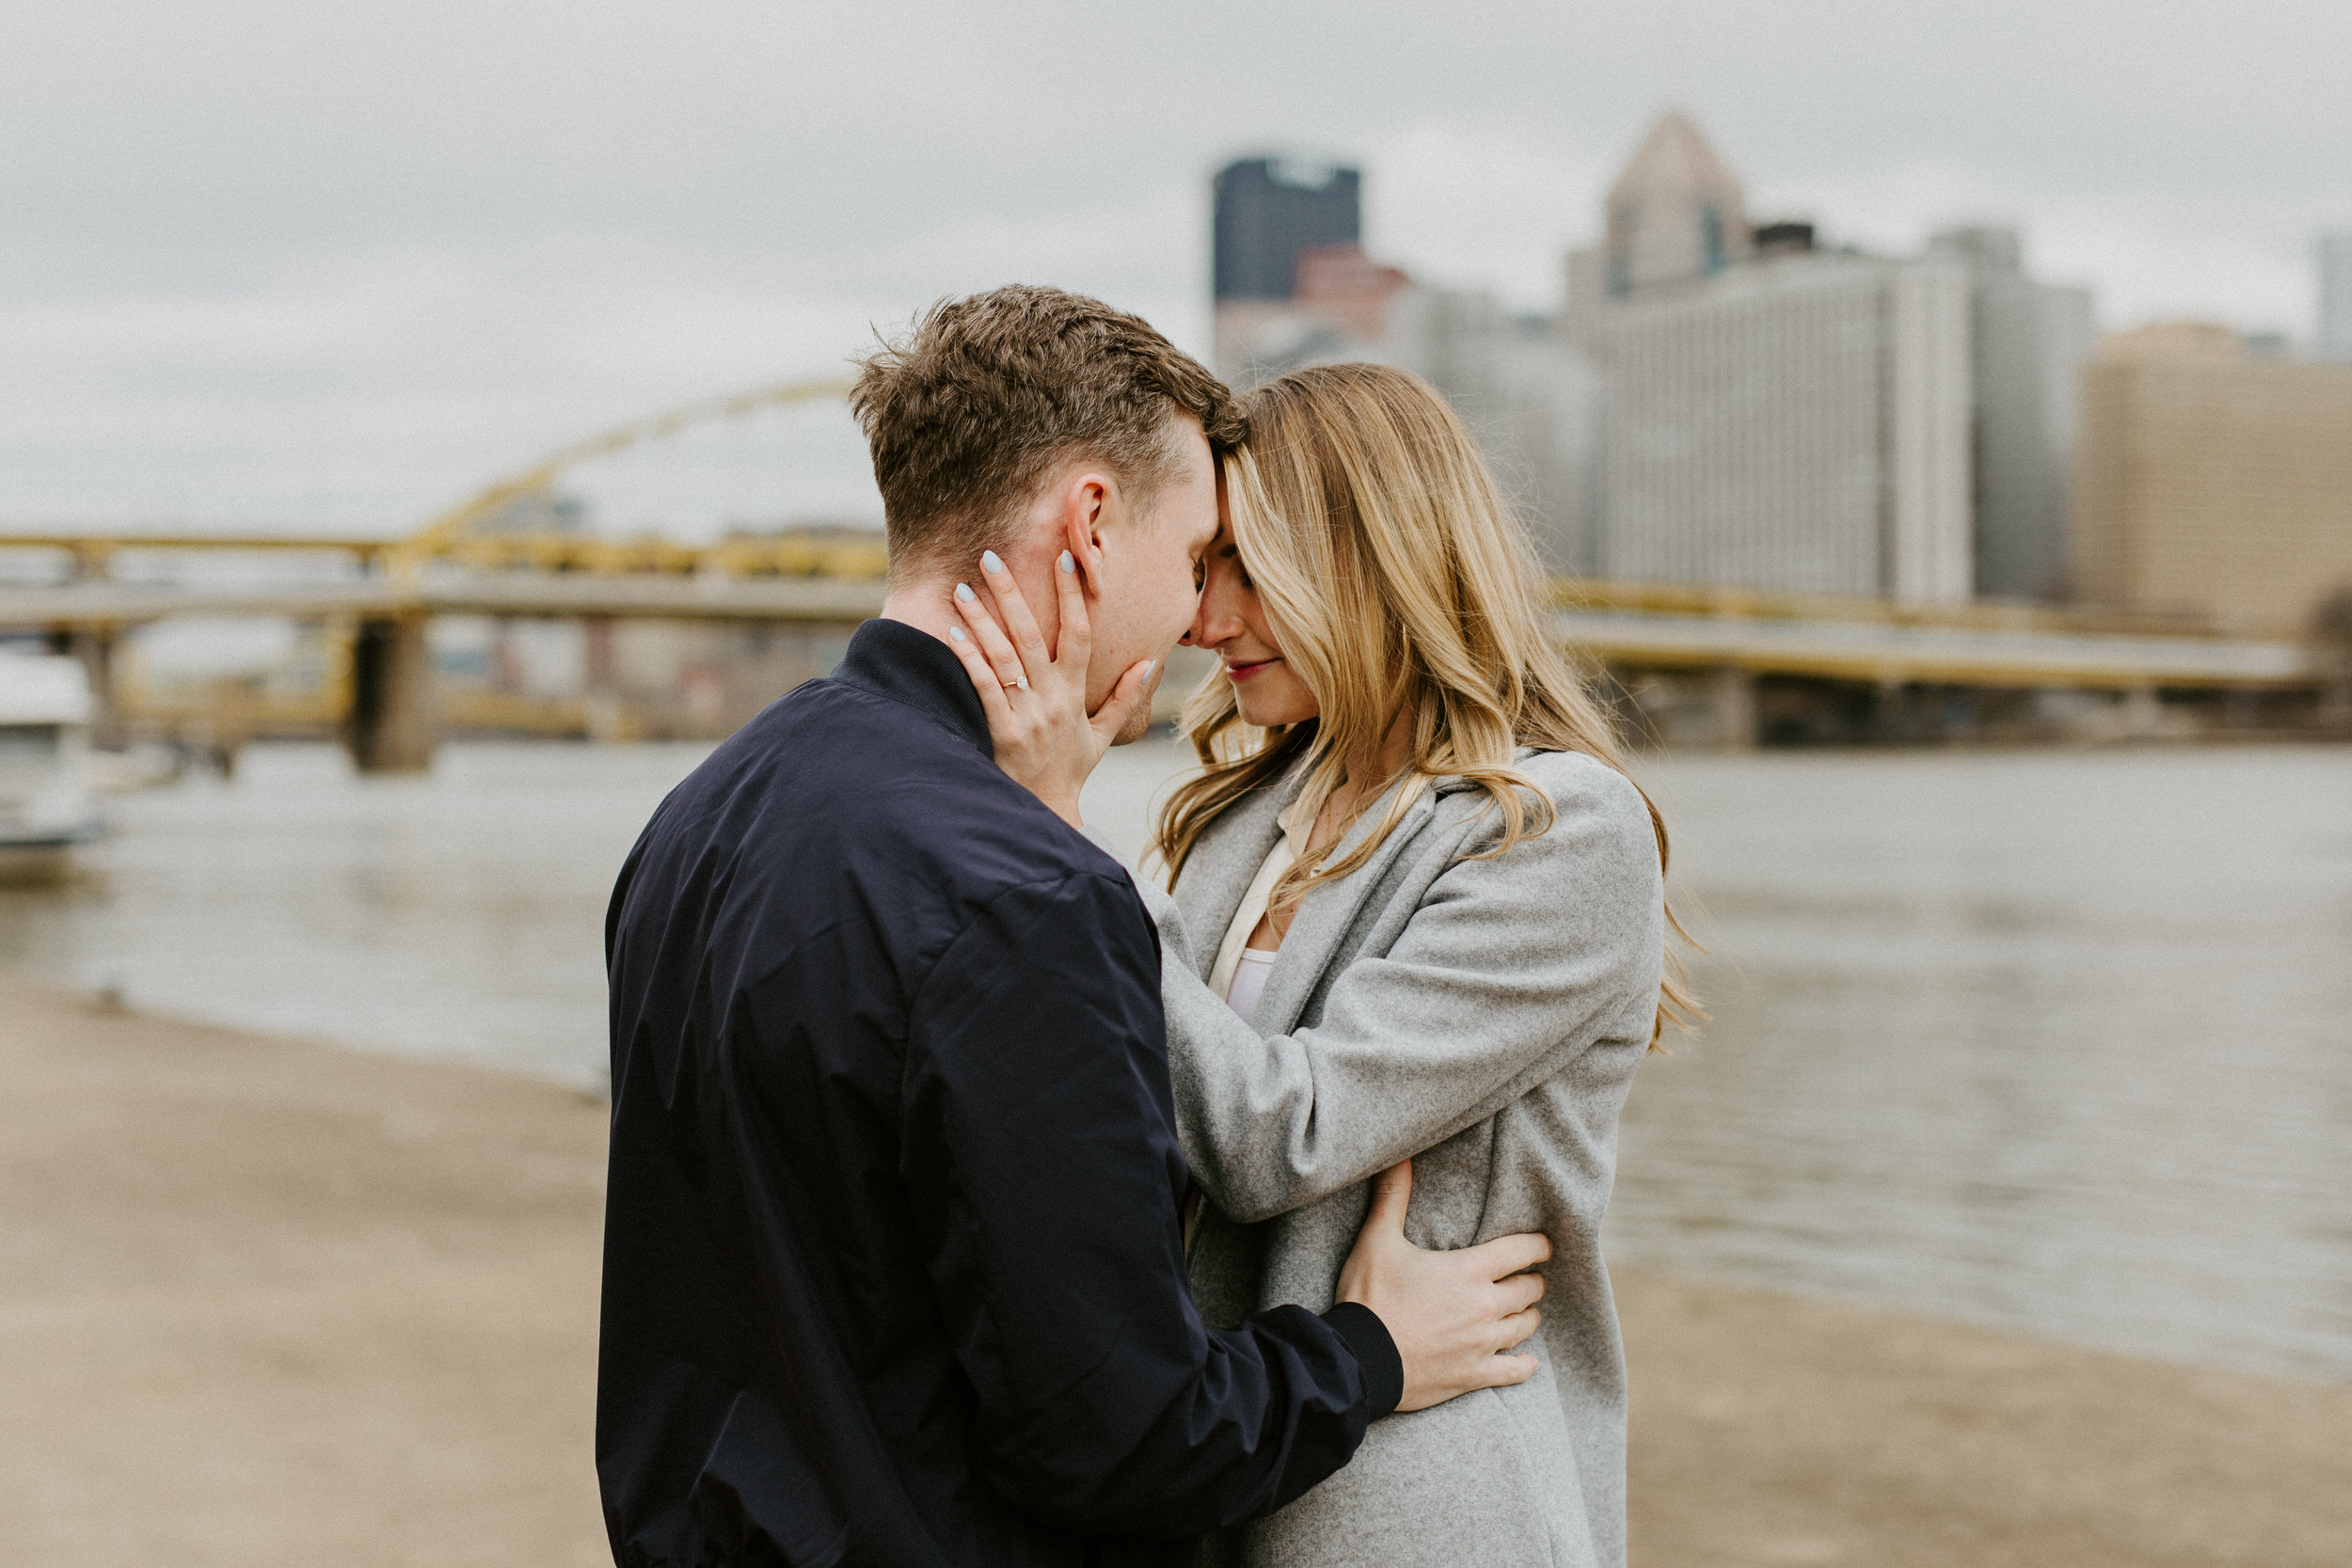 pittsburgh proposal locations